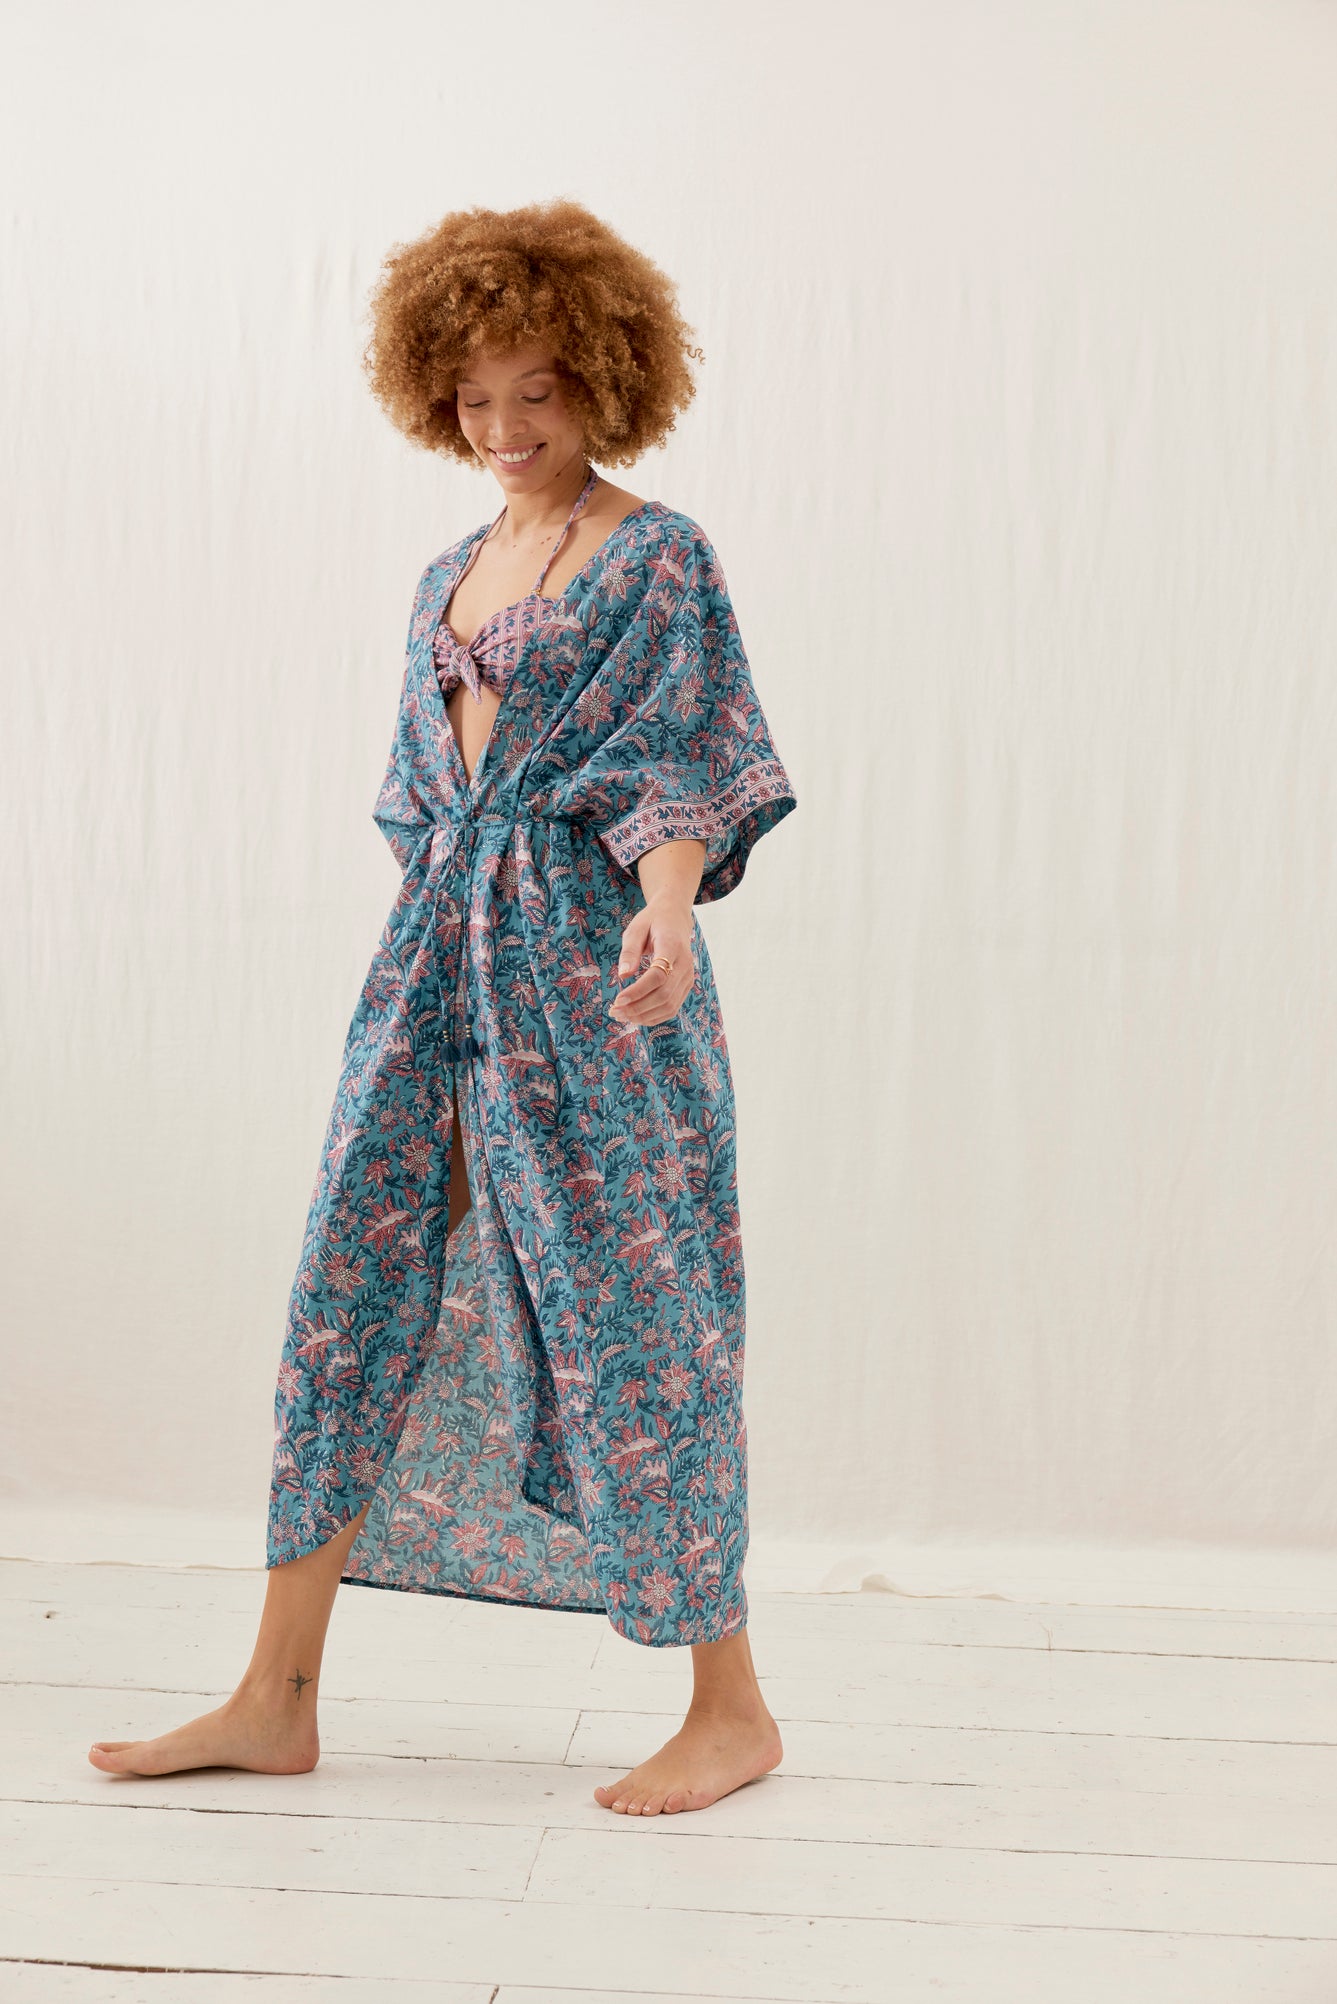 The Chill Kimono can also be worn as a casual dress and is easy to match with any of our swimwear. Louise Misha makes this stunning women kimono and is the perfect addition to your beach wear. Shop the best lounge wear and summer fashion for women. This beach cover up is must have for this summer and holidays.